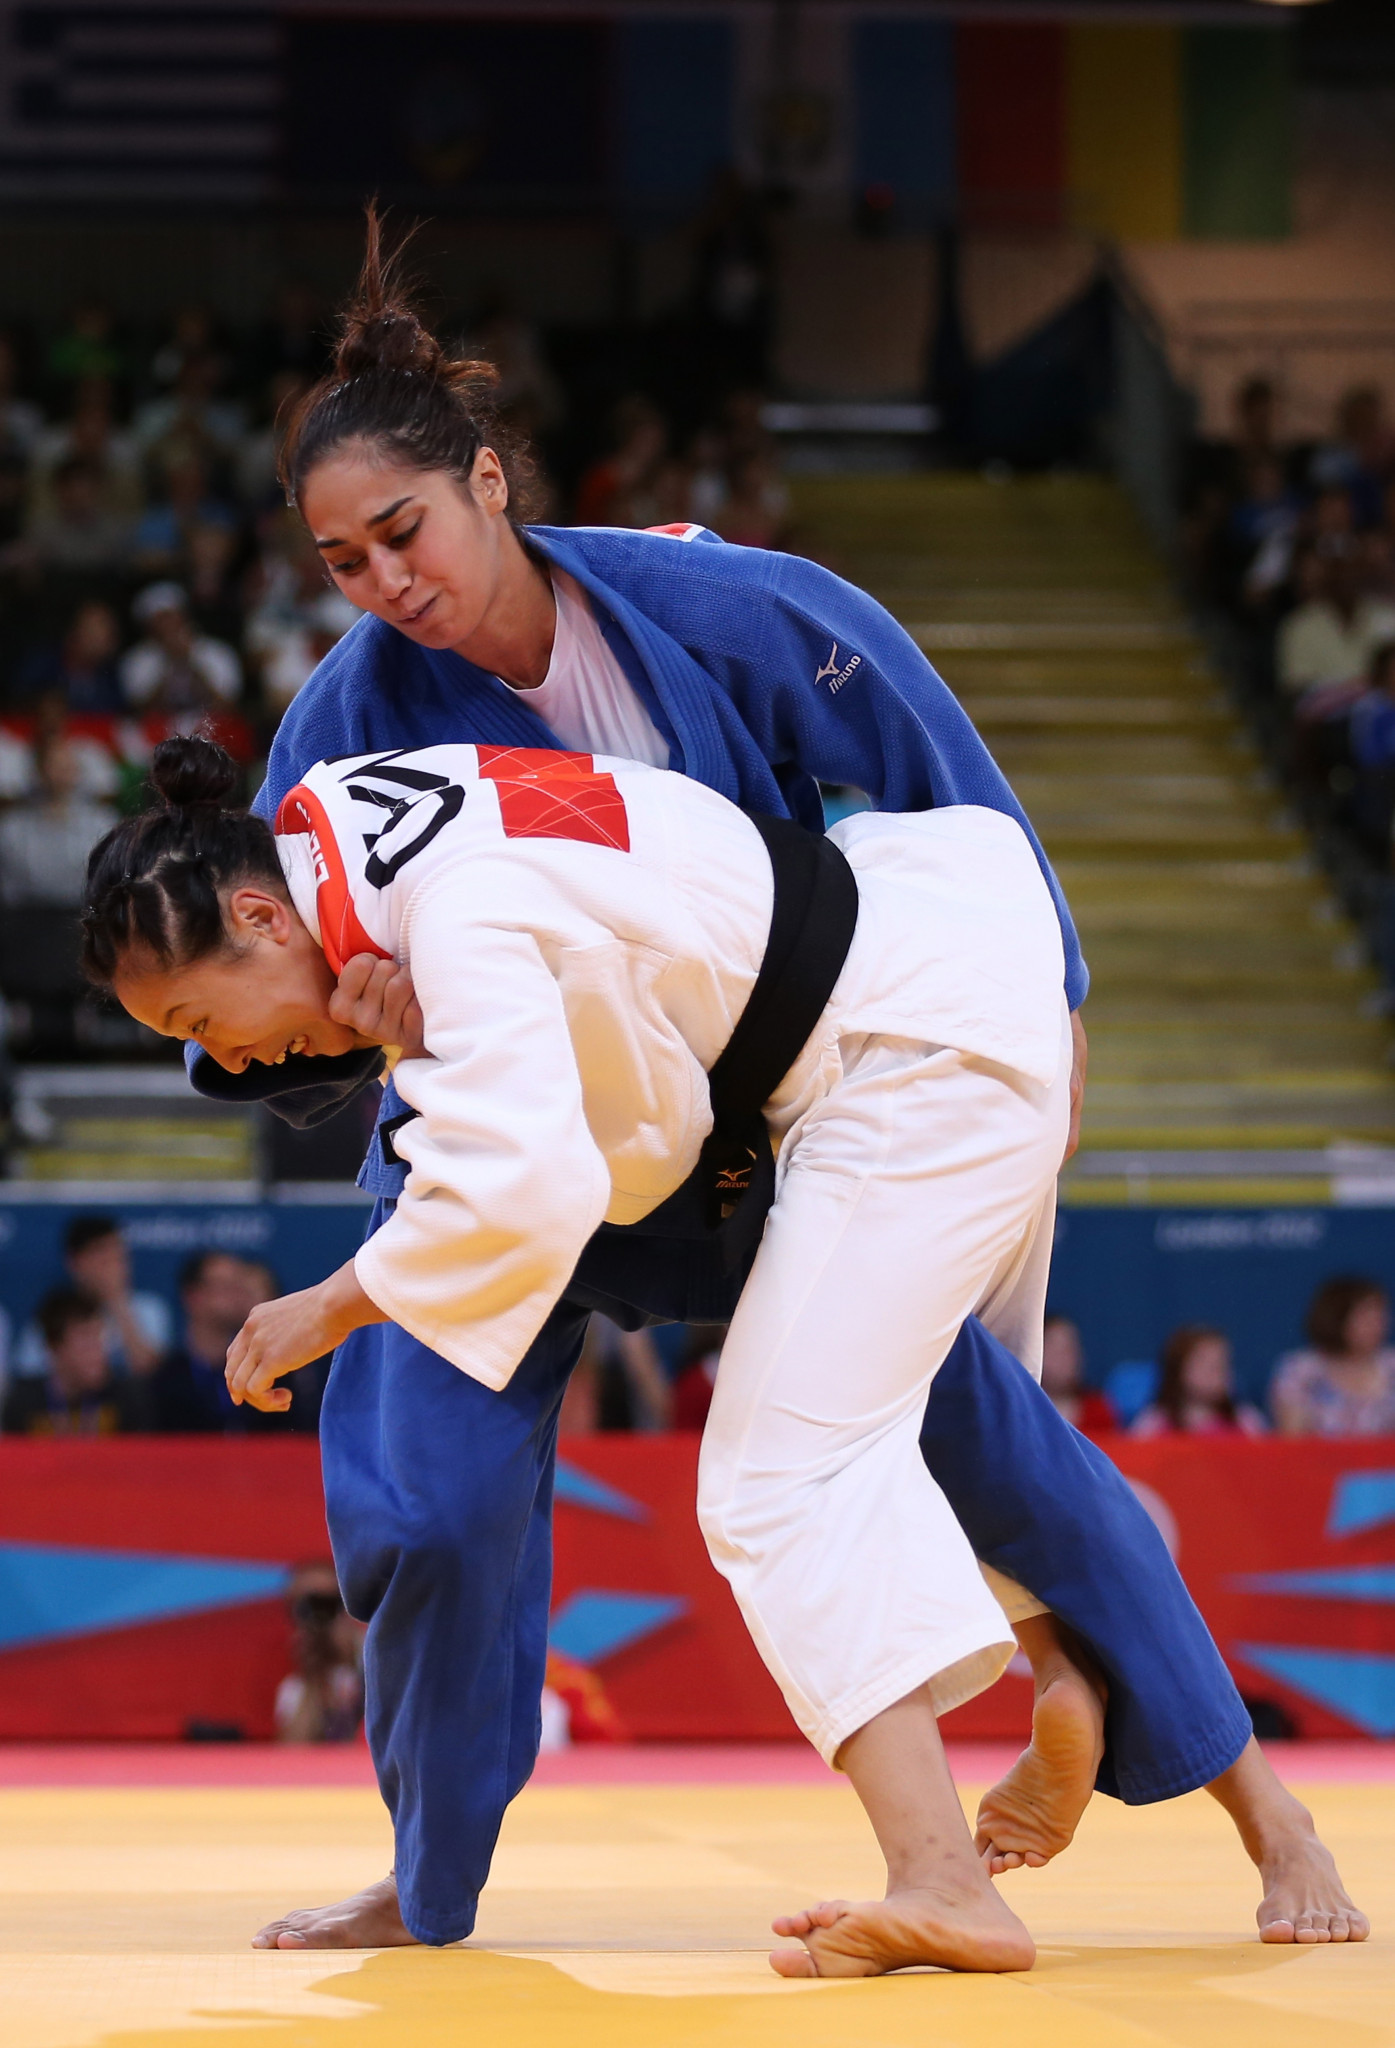 Jennifer Anson represented Palau at the London 2012 Olympic judo tournament ©Getty Images